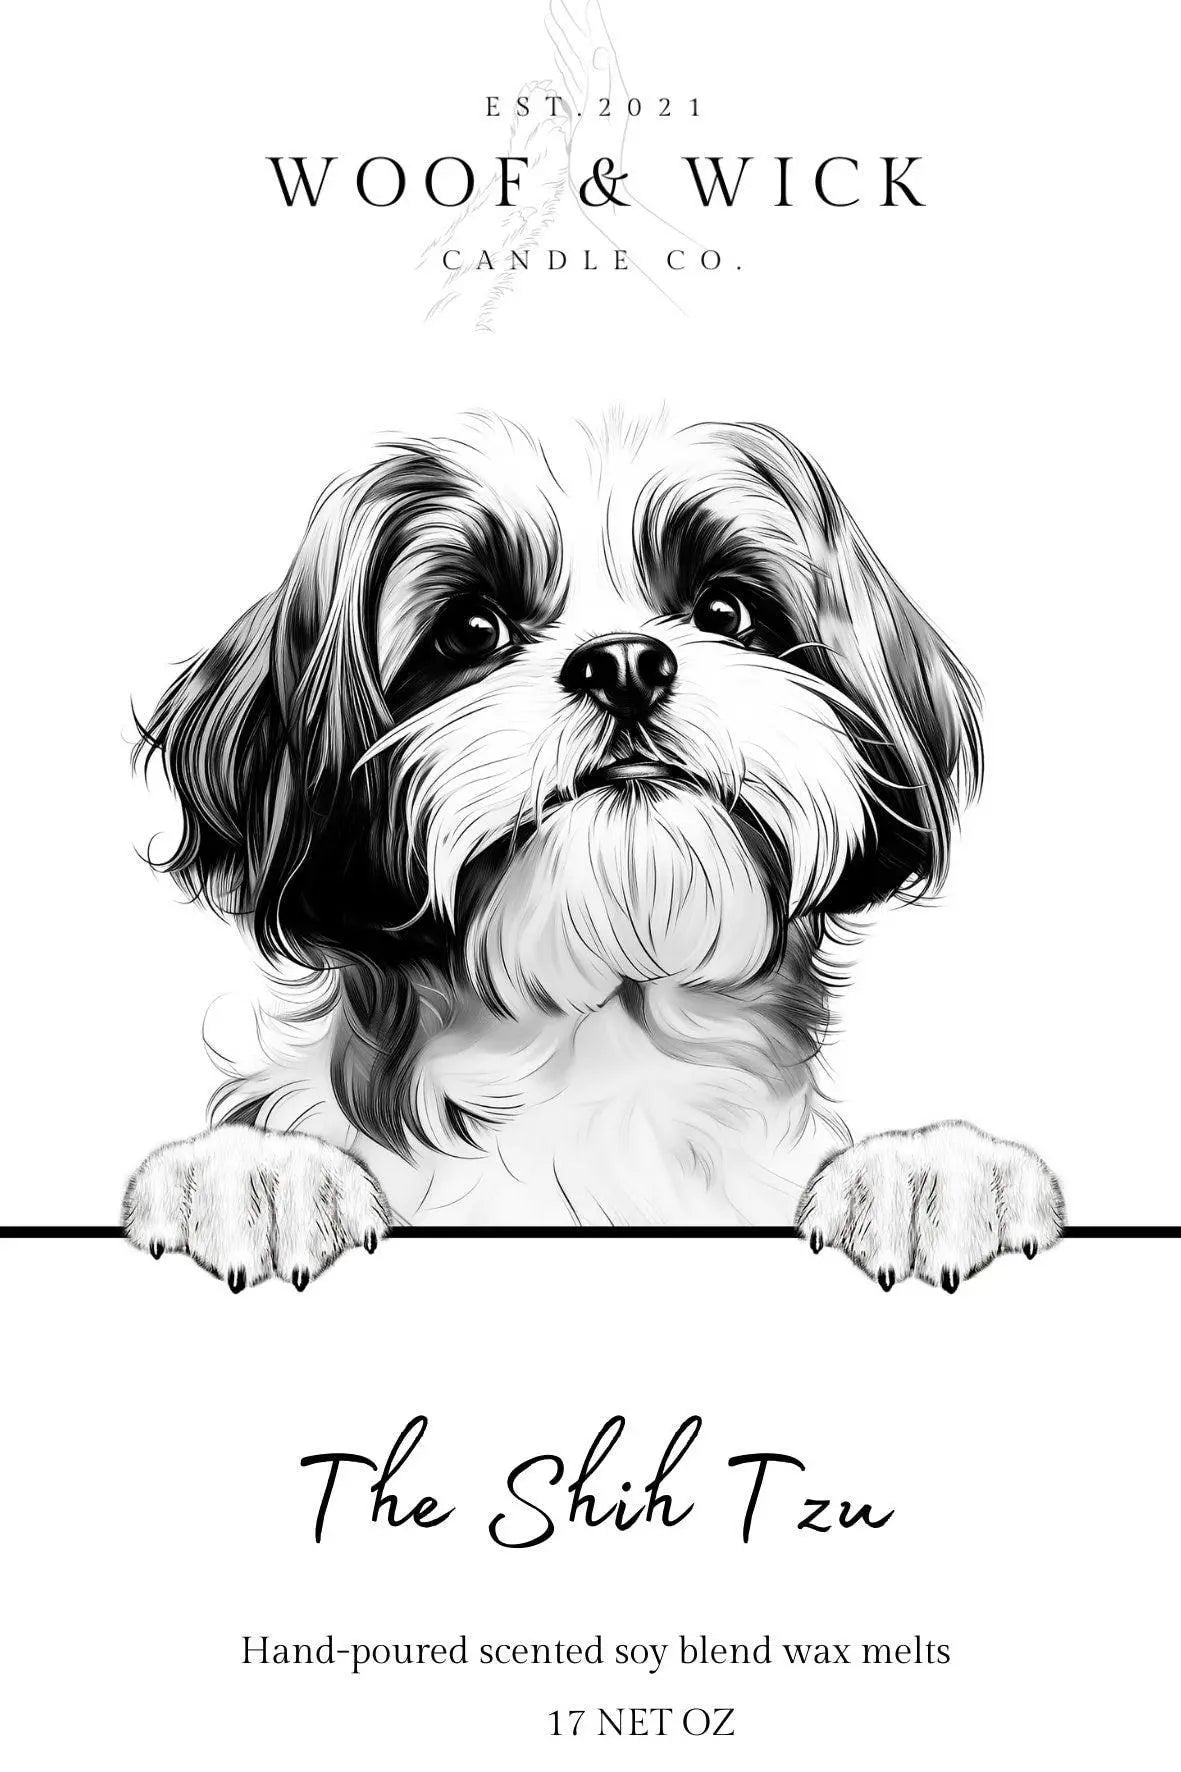 The Shih-Tzu - STRONG SCENTED Personalized Dog Breed Soy Wax Melts | Gift Ideas | Spring Scents | Wax Tarts | spring wax melts | - Woof & Wick Candle Co.